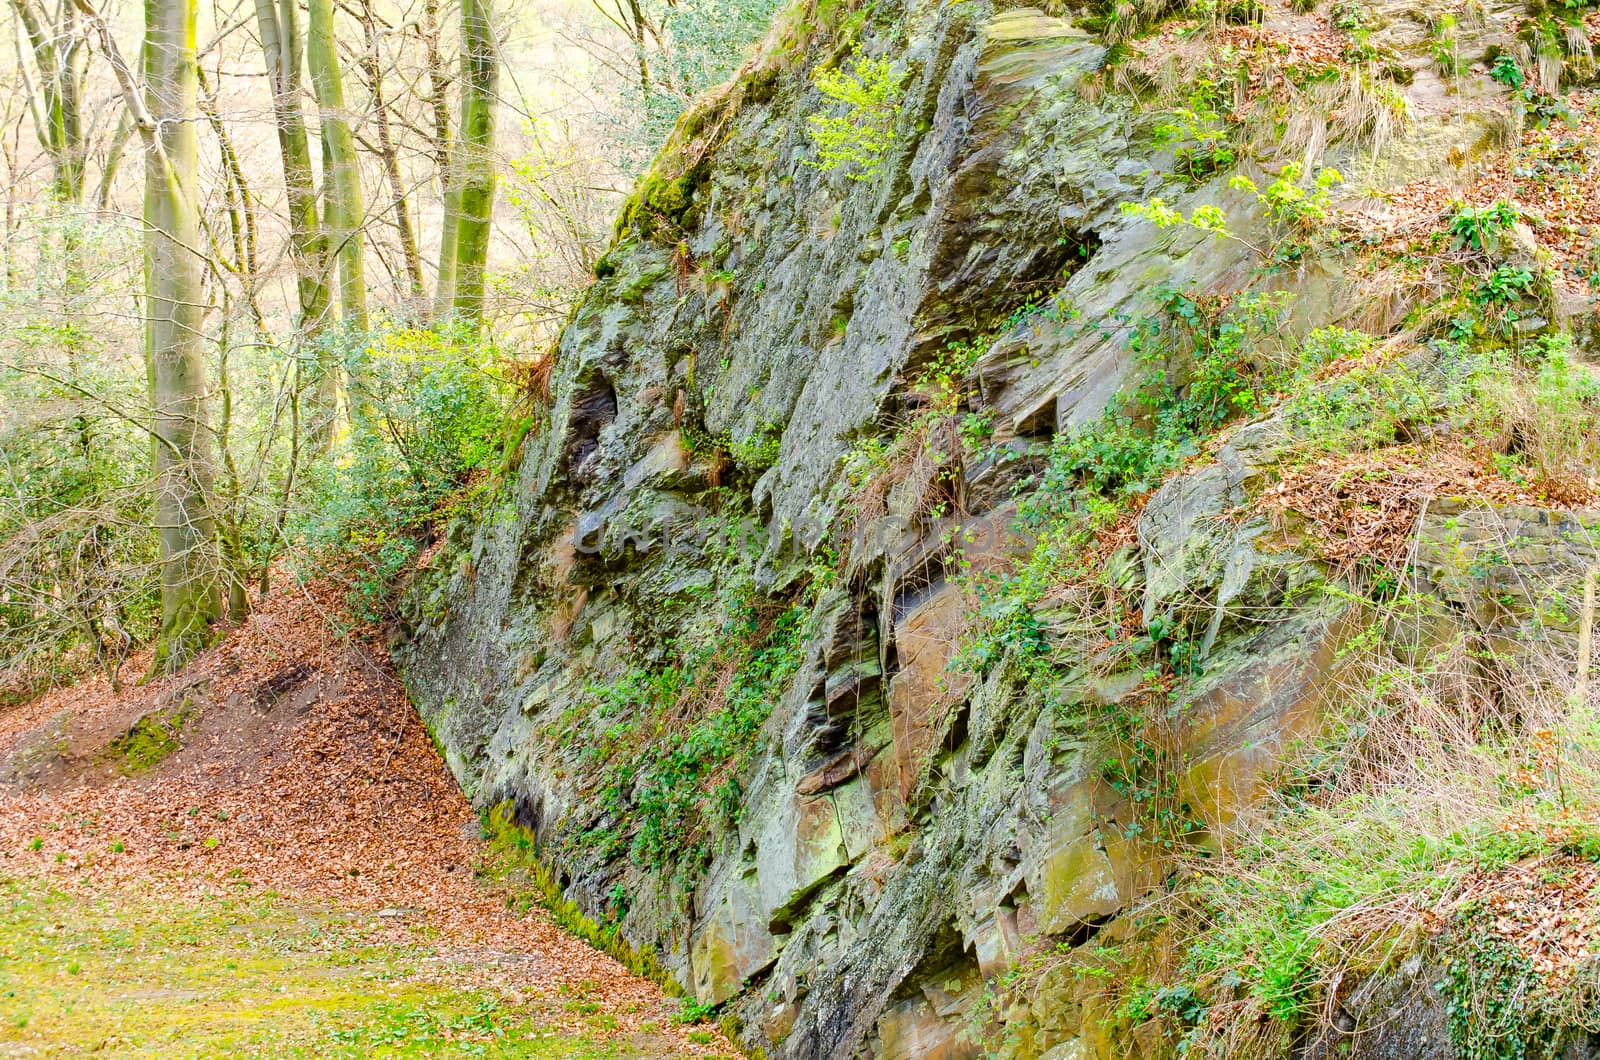 Steep cliffs, rocky slope with moss in the forest
